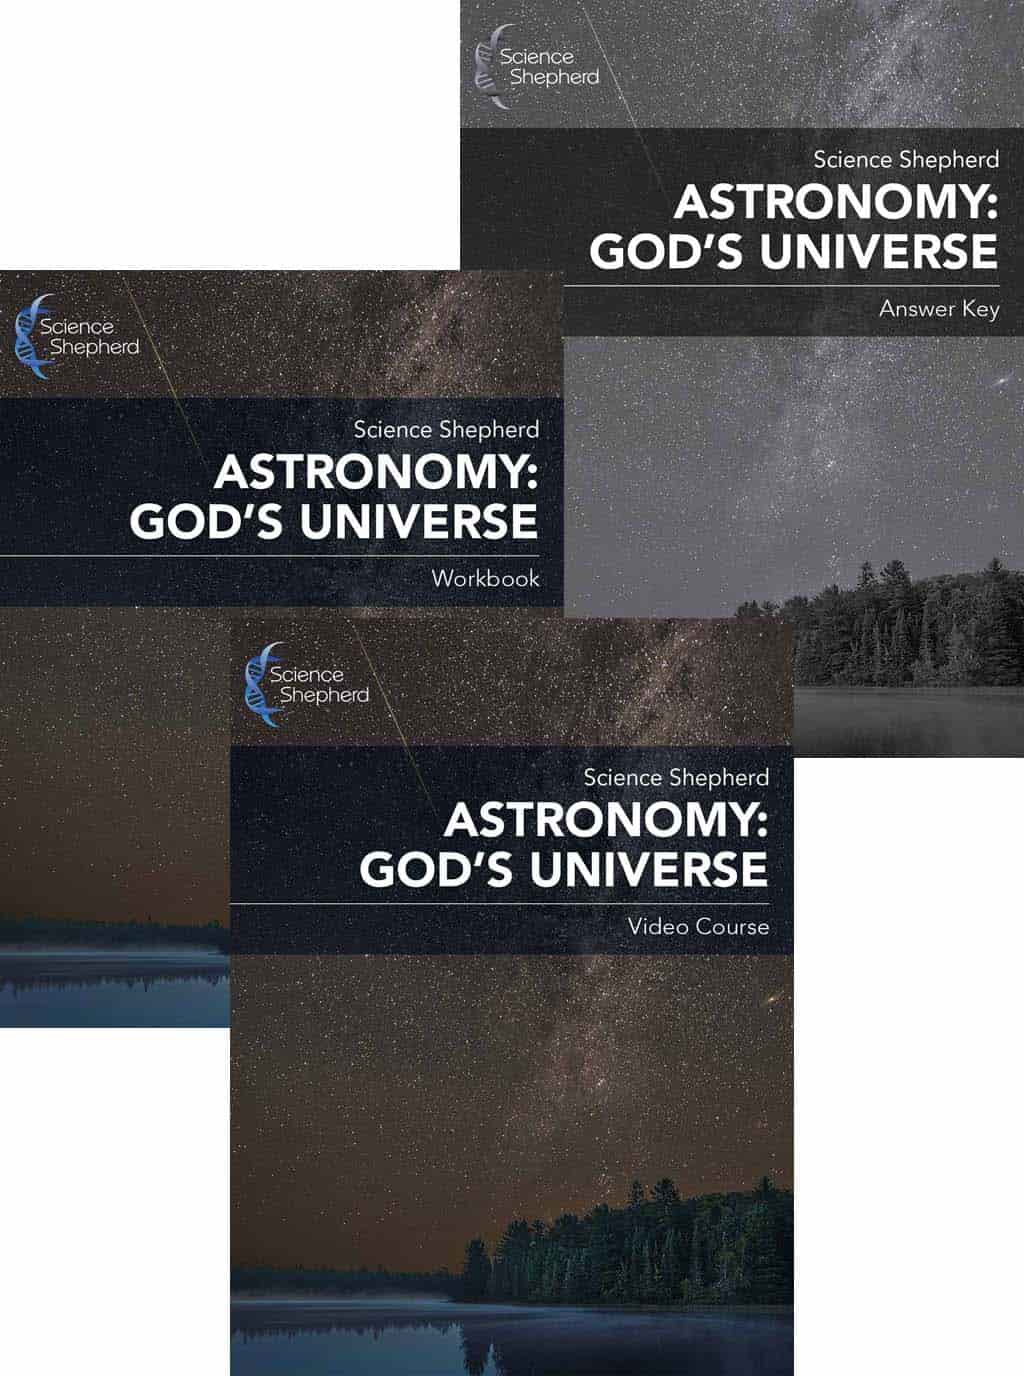 Christian astronomy curriculum bundle cover showing the video course, workbook and answer key